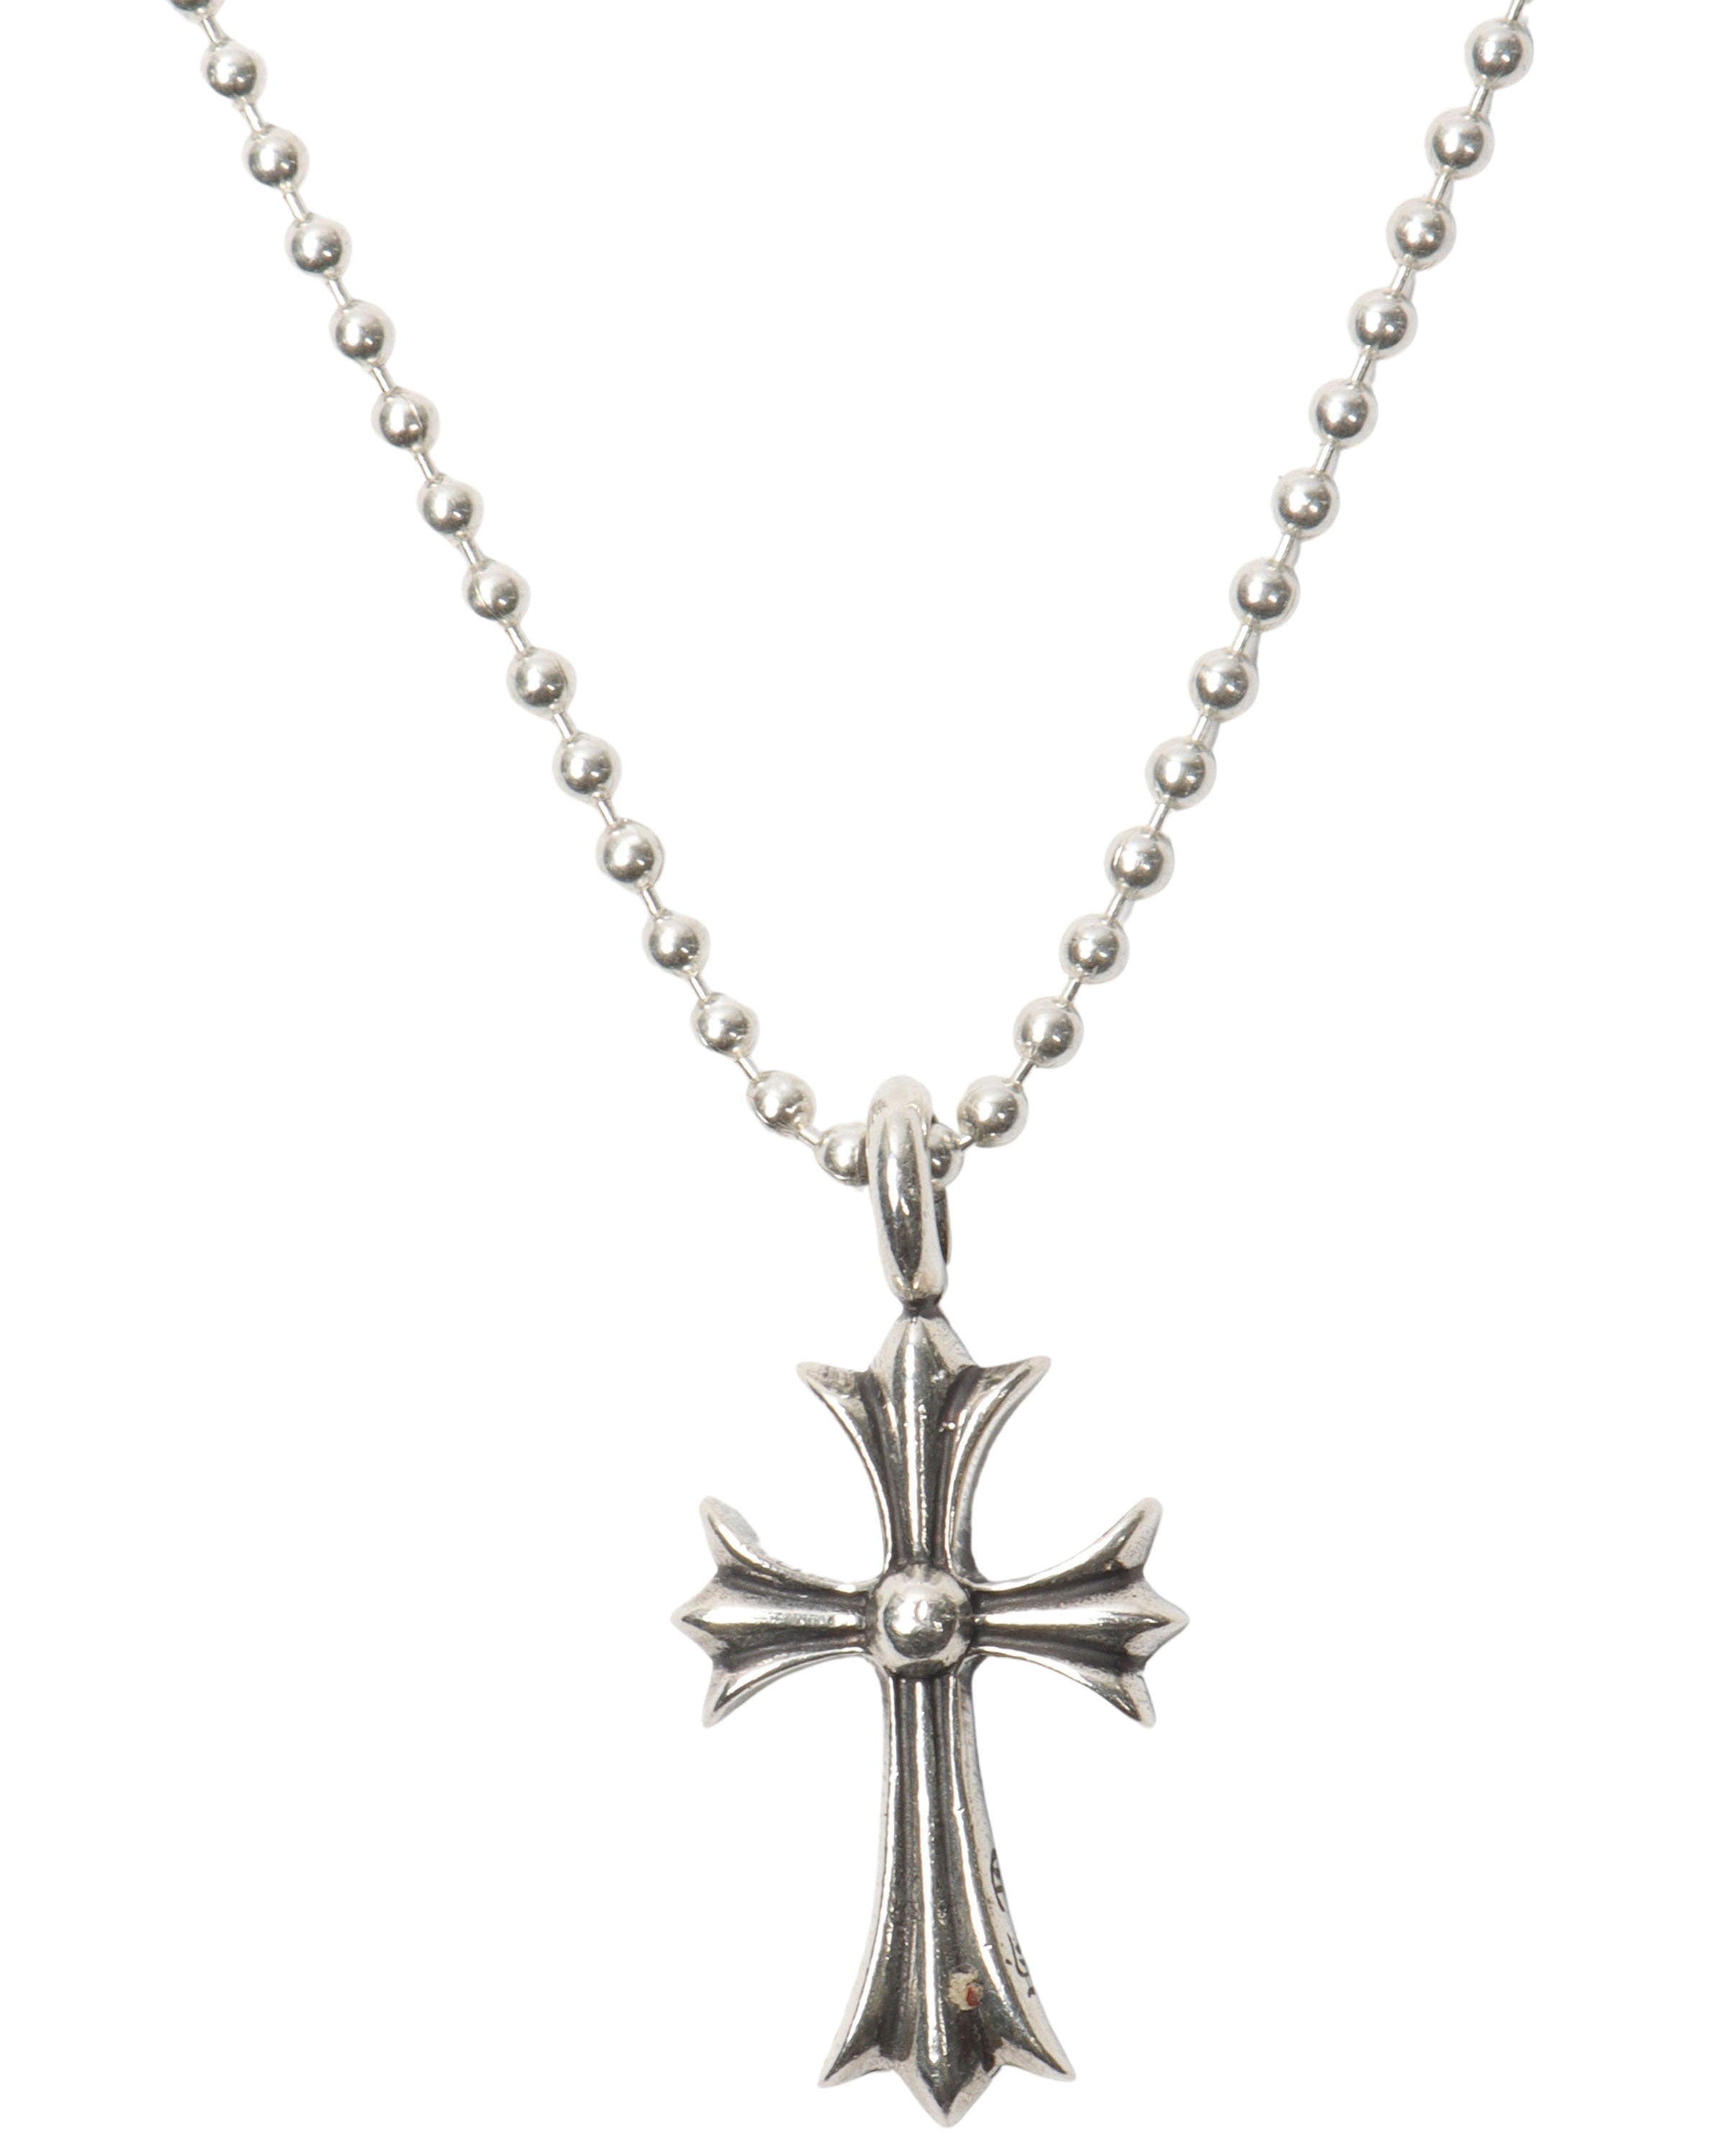 CHROME HEARTS Chrome Hearts all . pieces attaching necklace Cross fato baby  fato twist chain : Real Yahoo auction salling